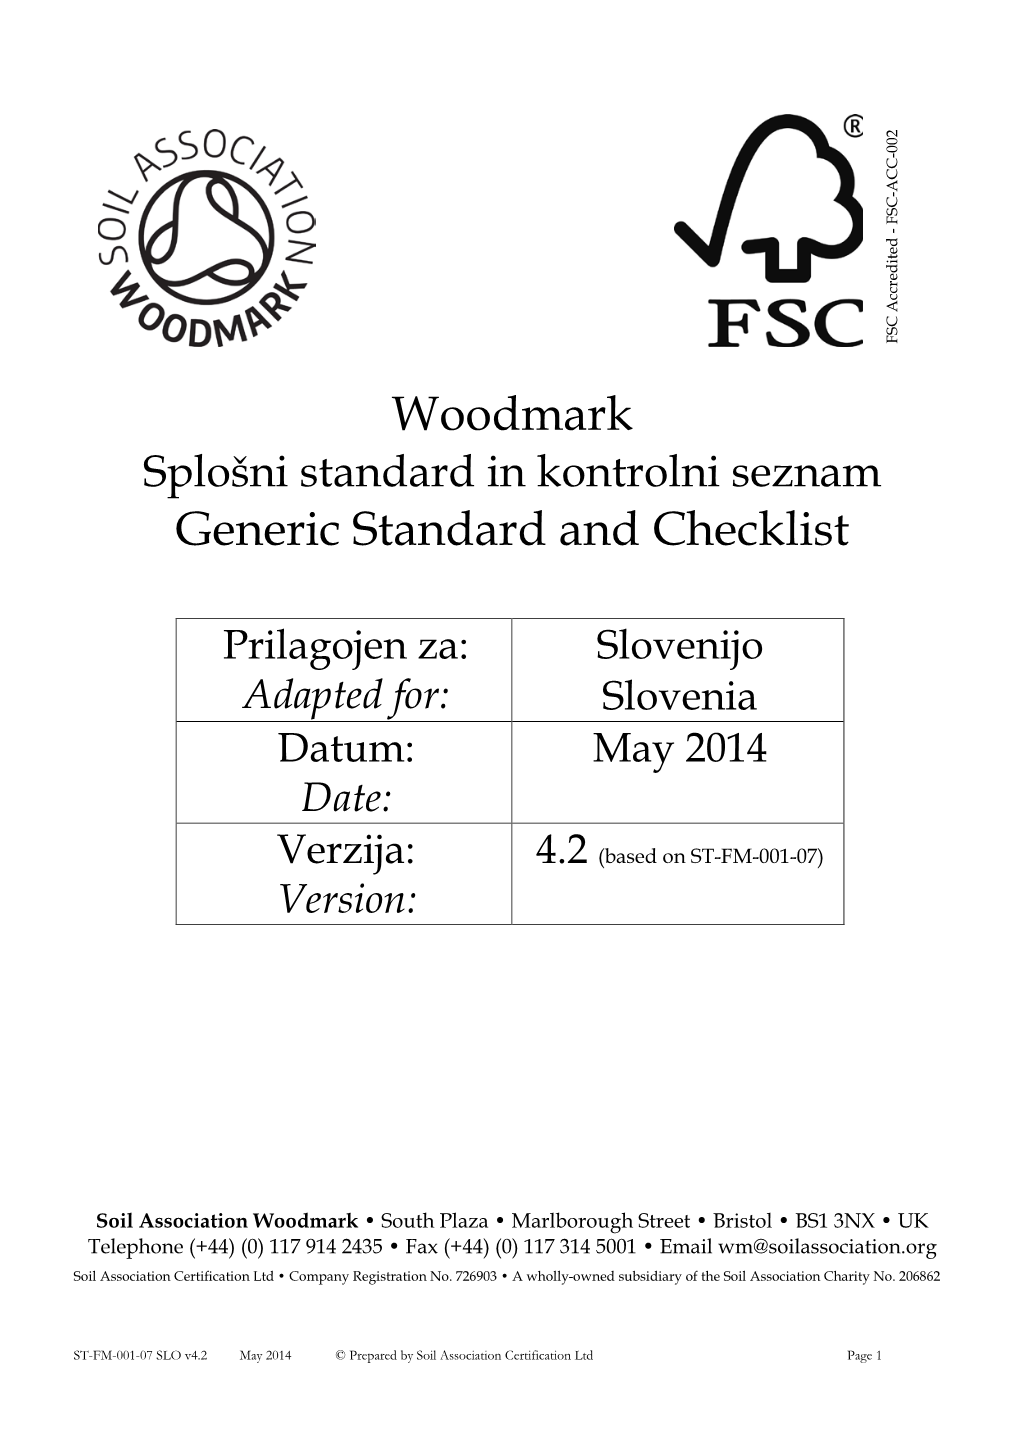 Woodmark Generic Standard and Checklist for Slovenia Modified to Meet Regional Conditions and Take Account of Existing Regional Standards